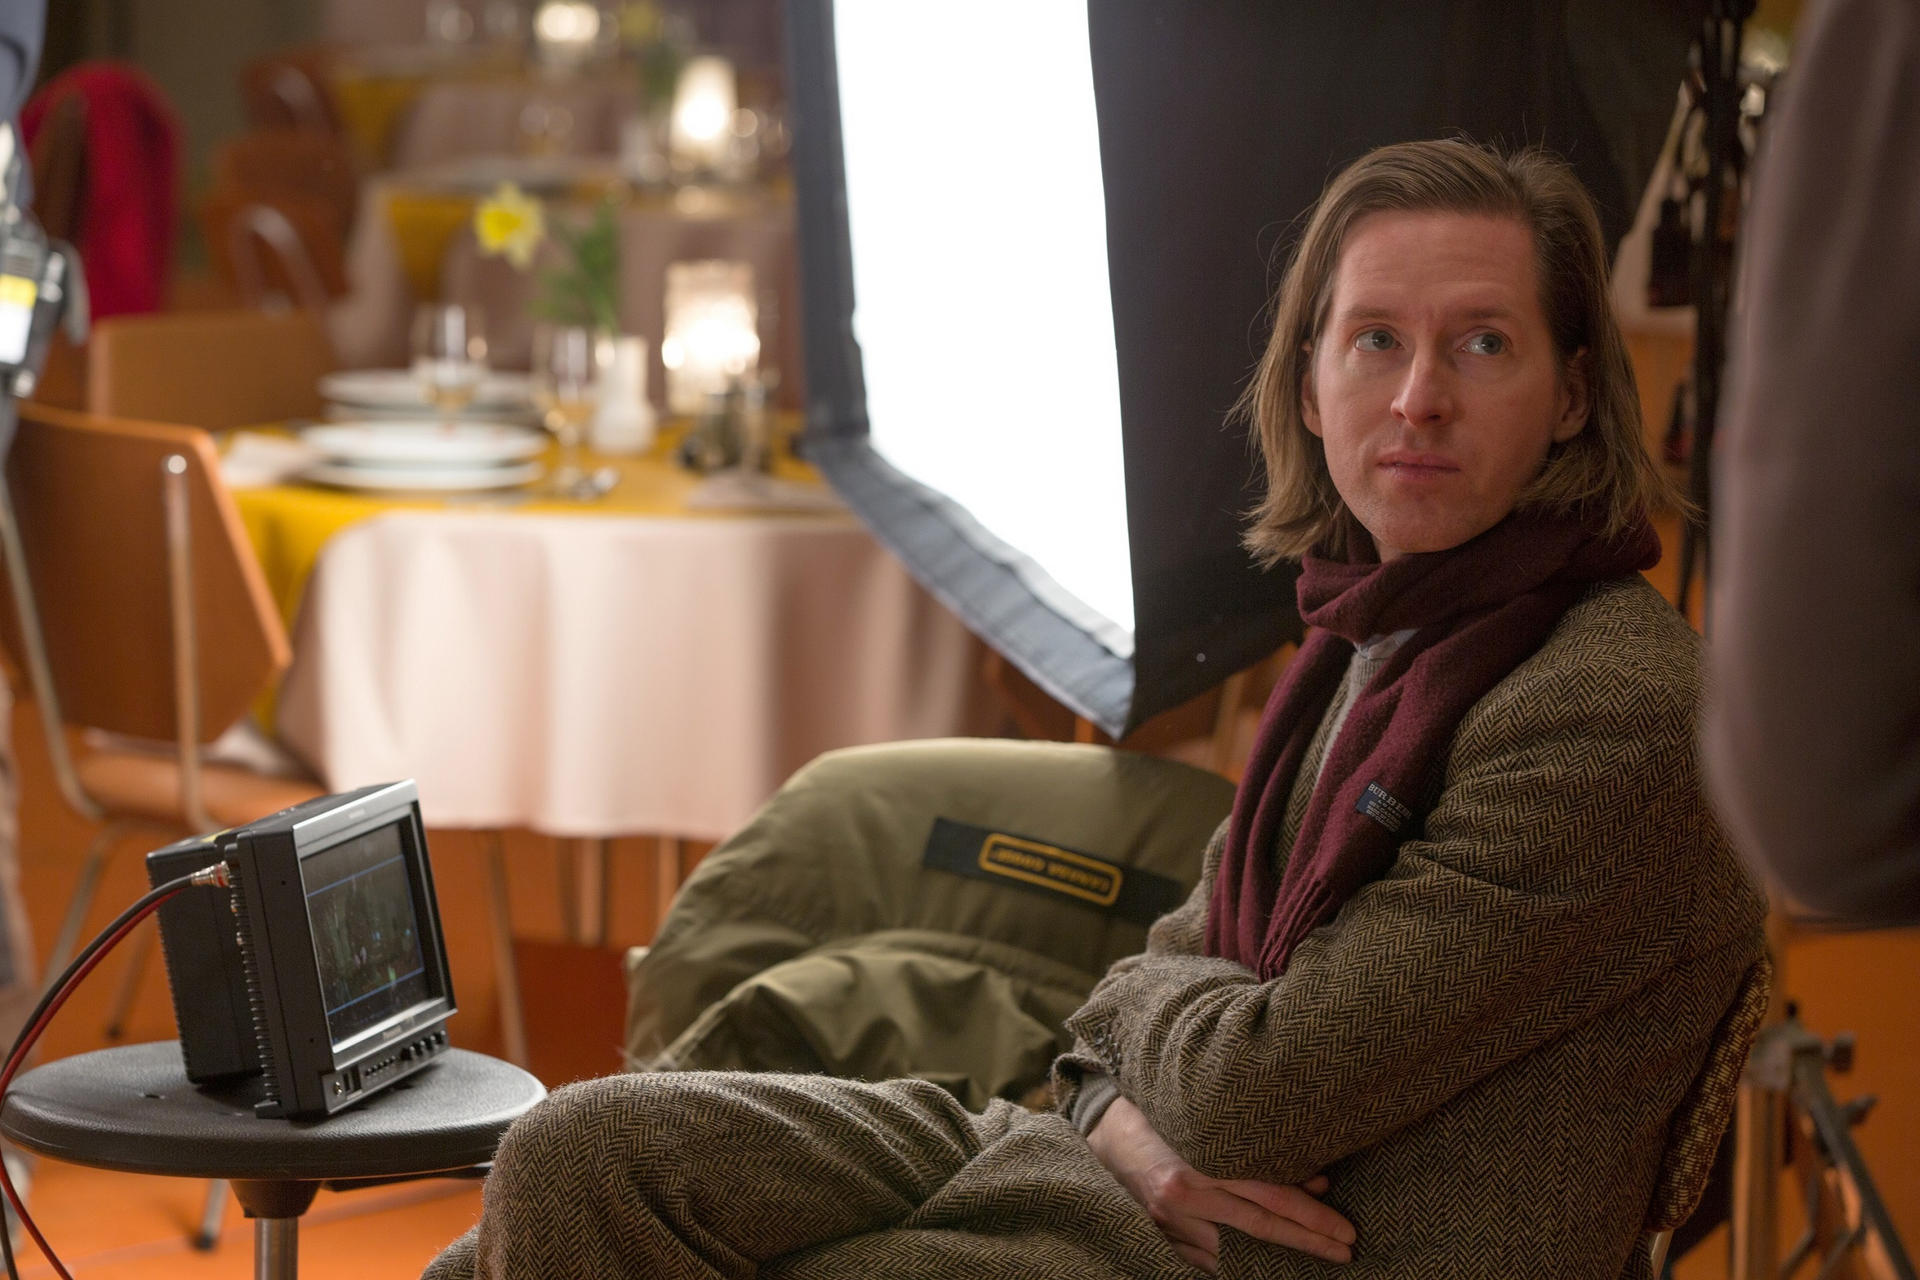 Wes Anderson on the set of The Grand Budapest Hotel. Photos: AP